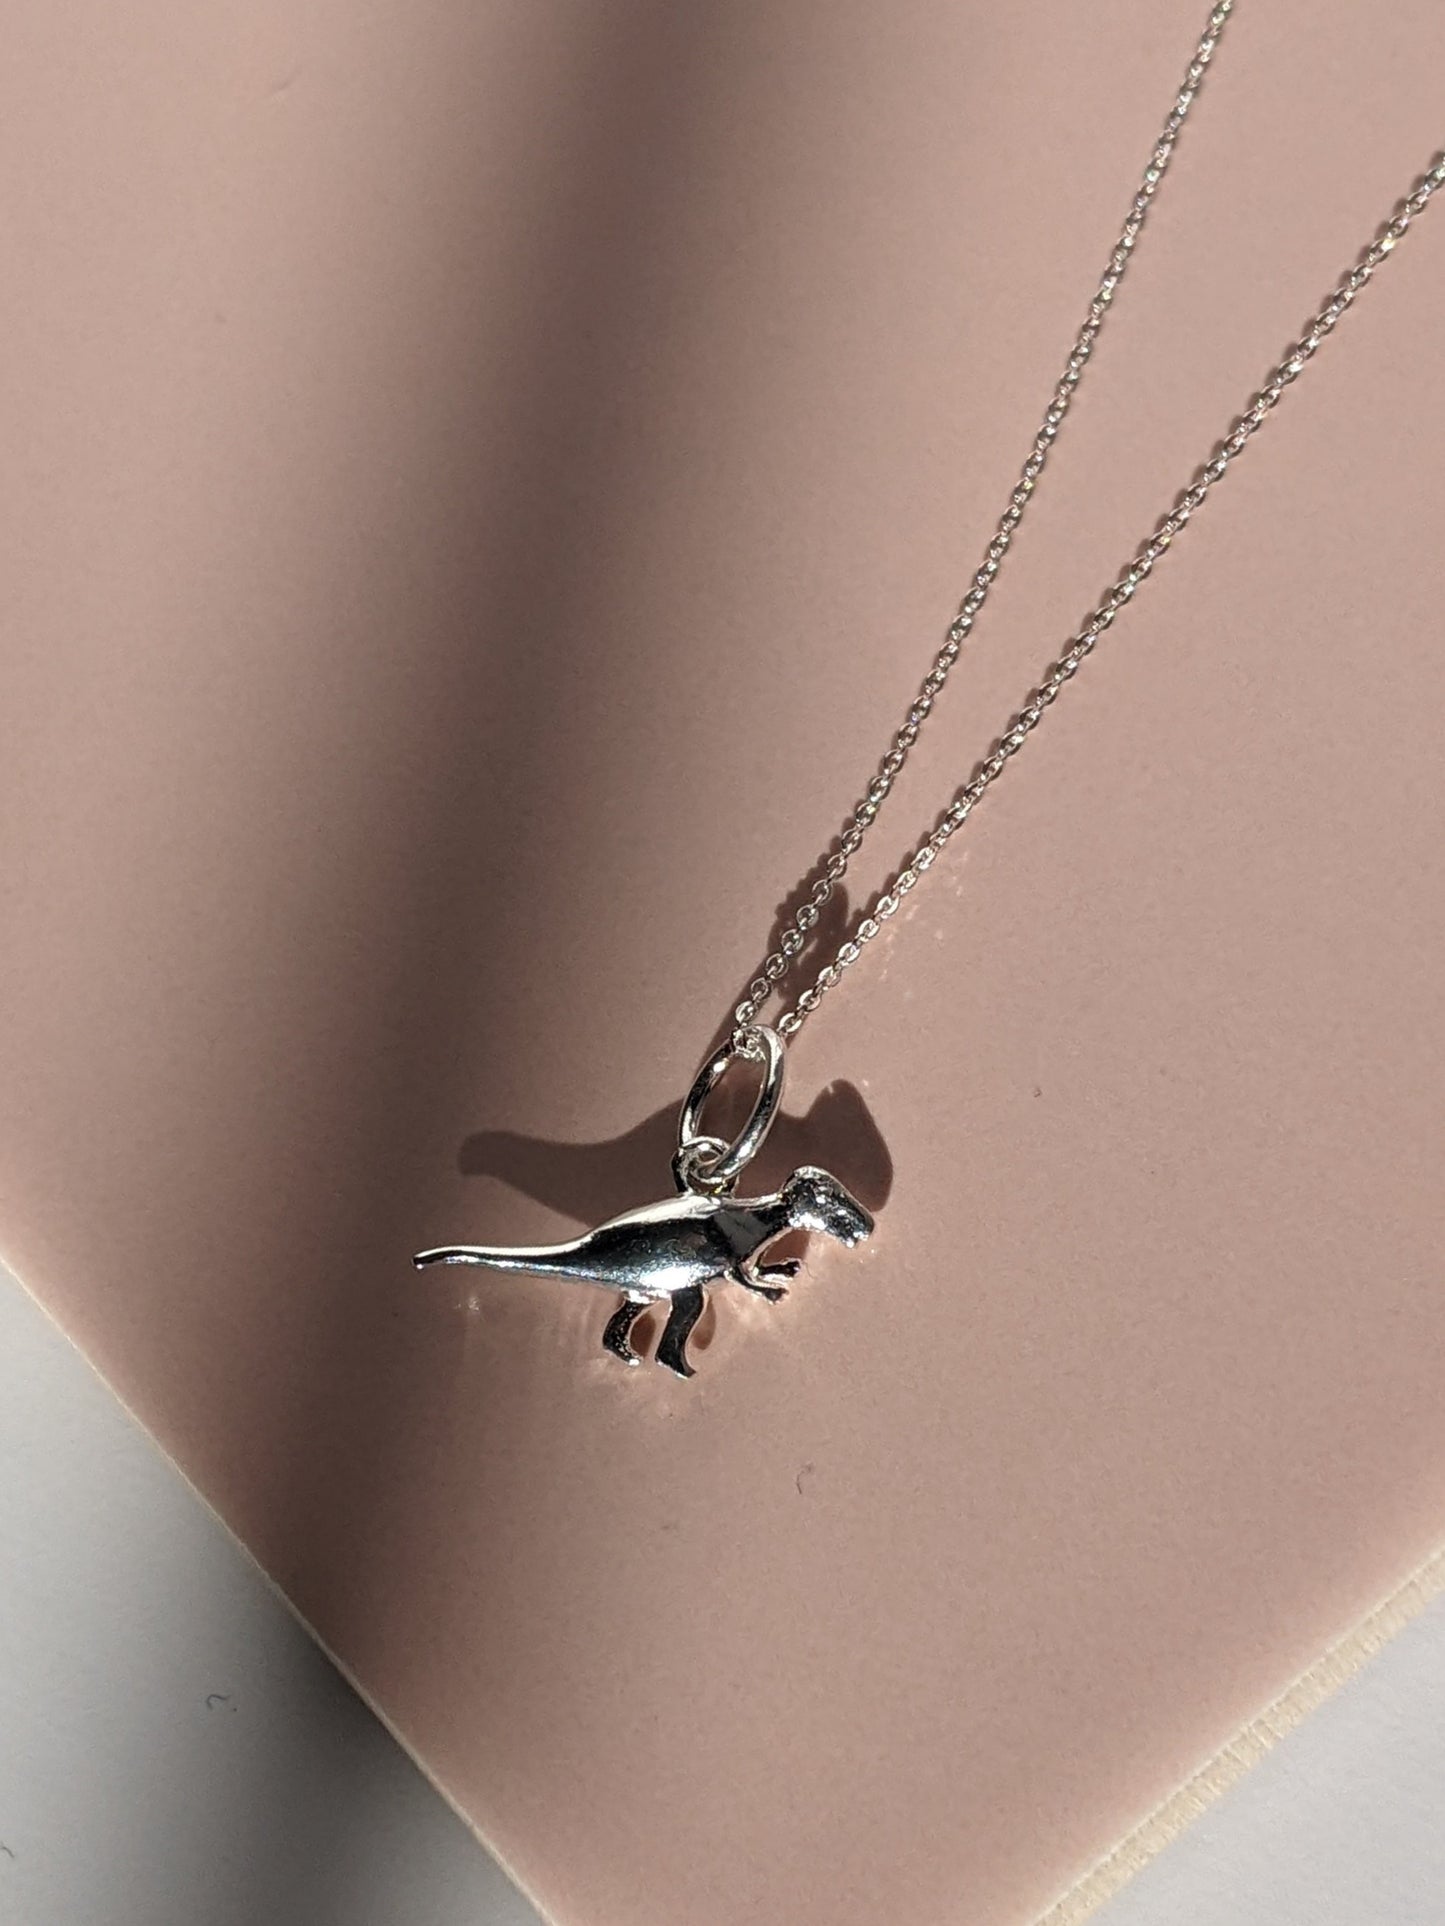 Eric the Dino Sterling Silver necklace